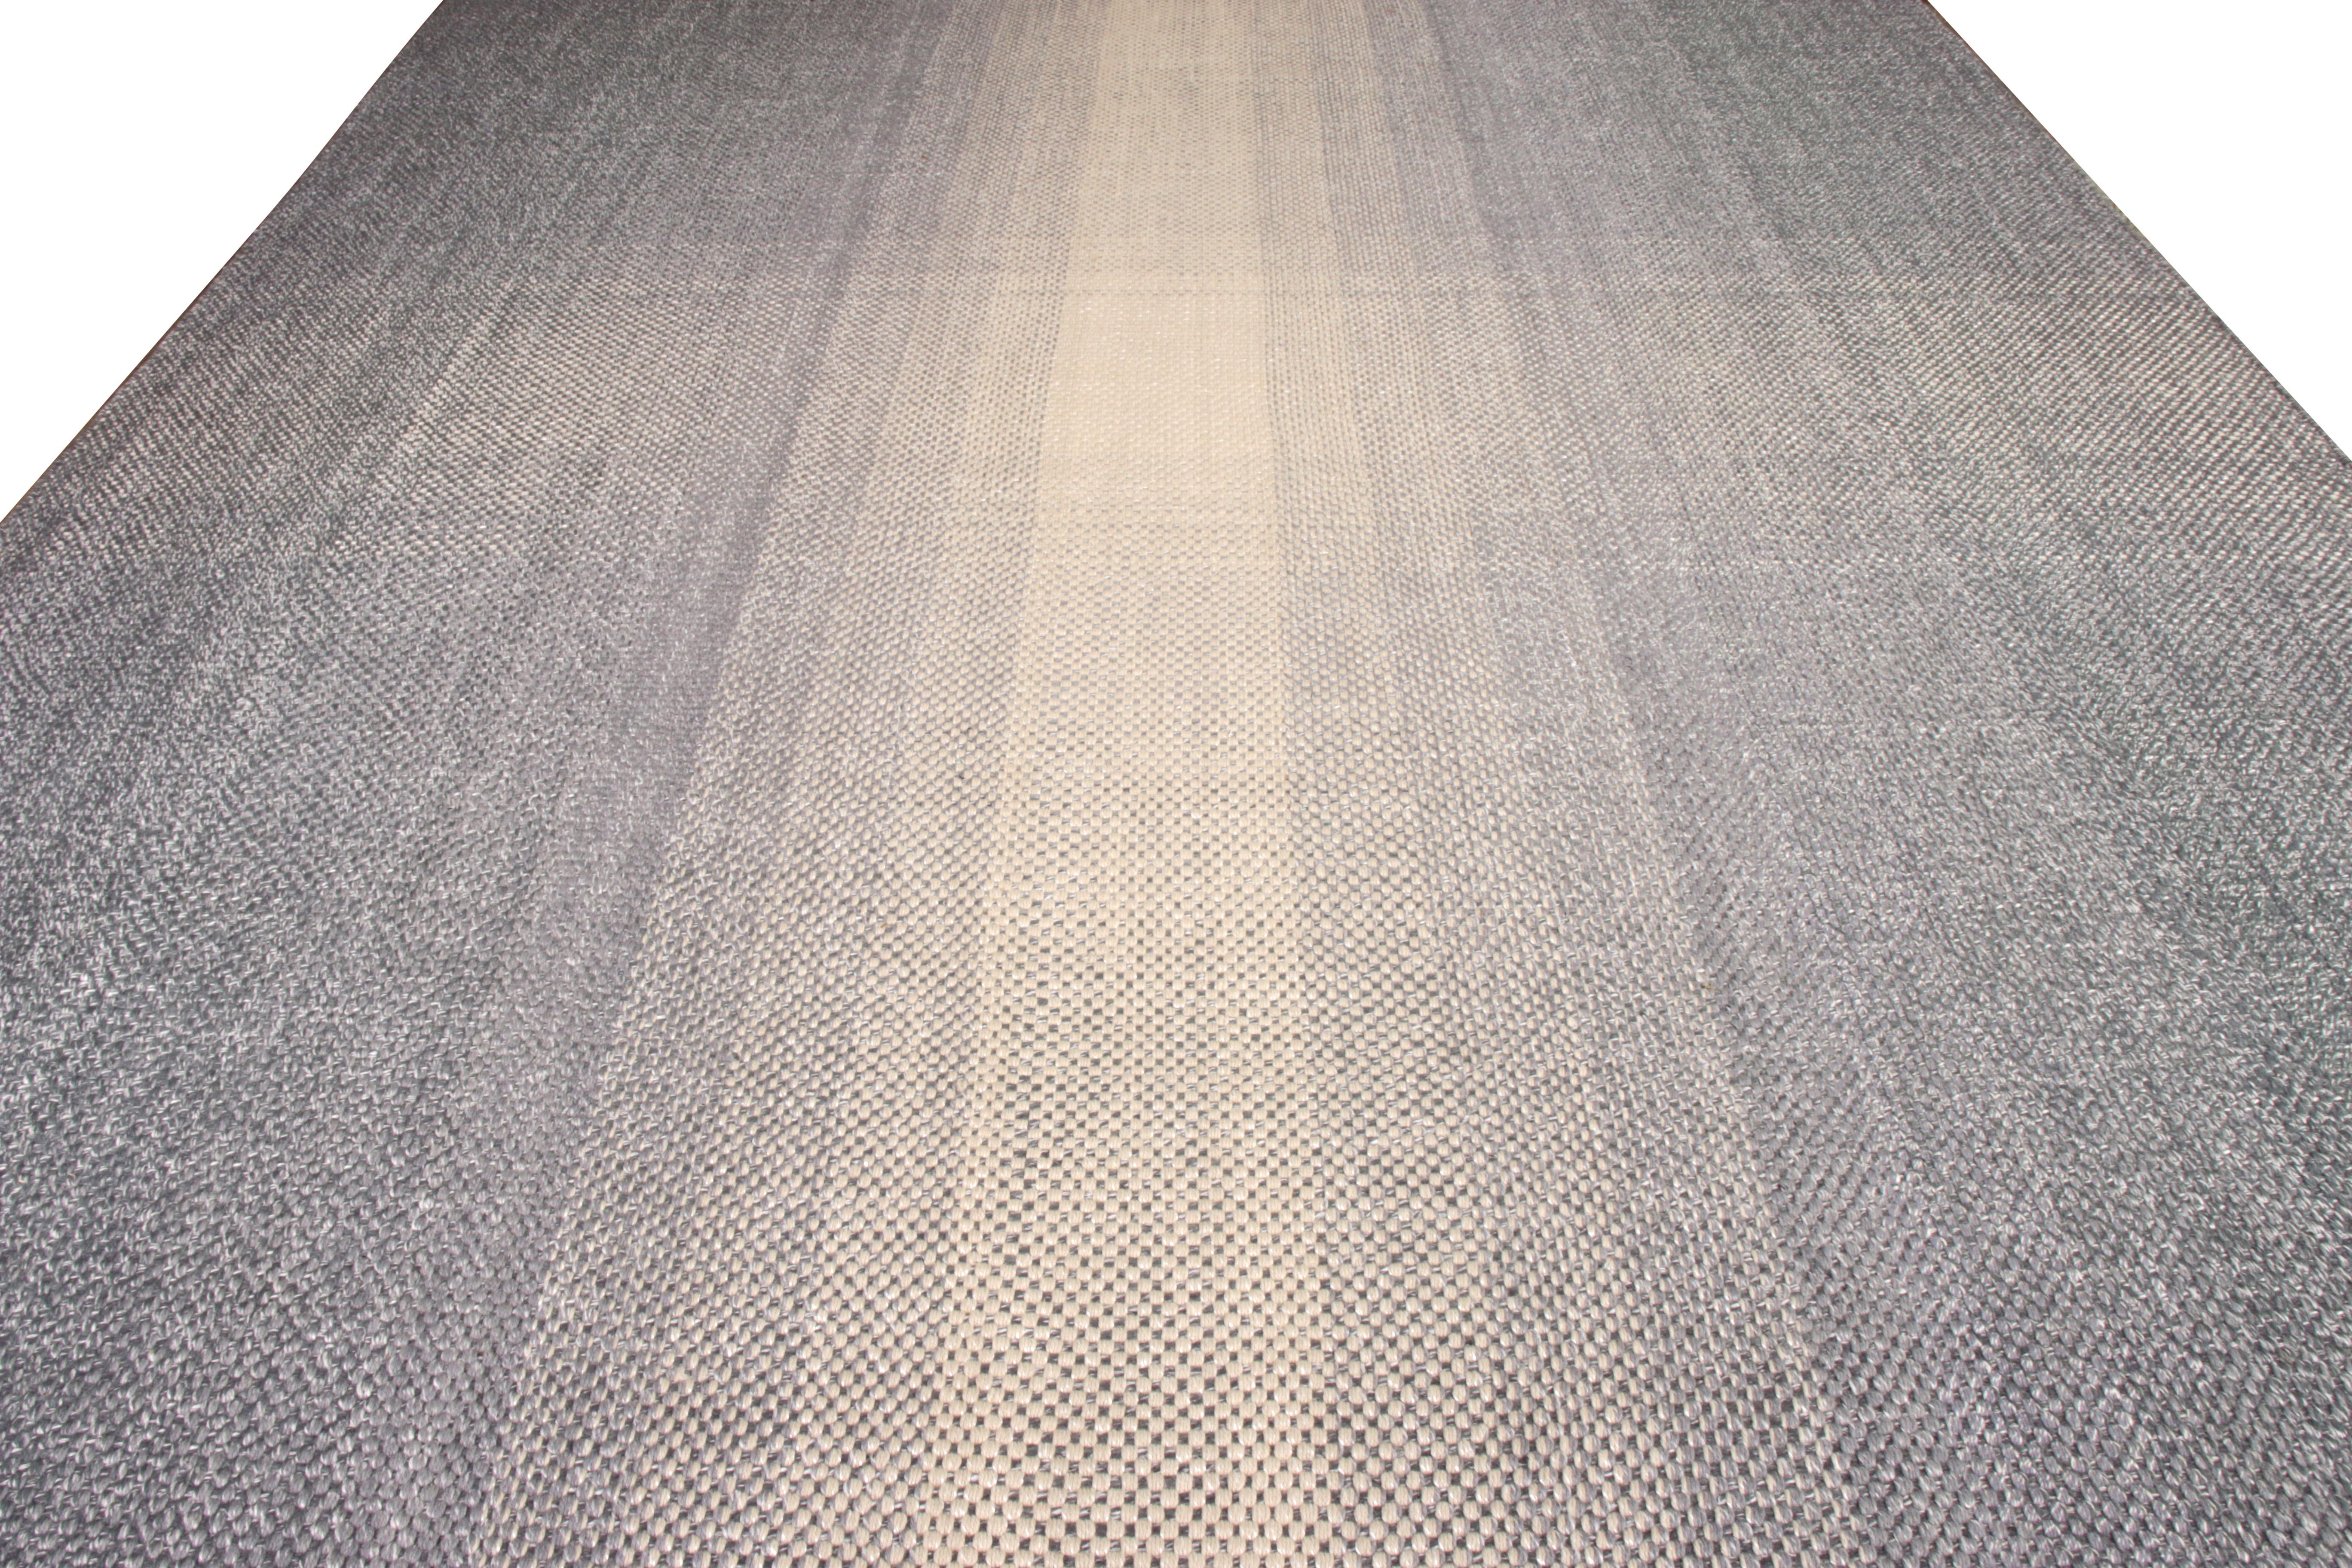 A custom rug design lending a unique addition to Rug & Kilim’s New & Modern Collection. Representing our Smart Loom style, the piece arrests attention with a mature blue and gray transitioning to white in the gradience—further enjoying an impeccable